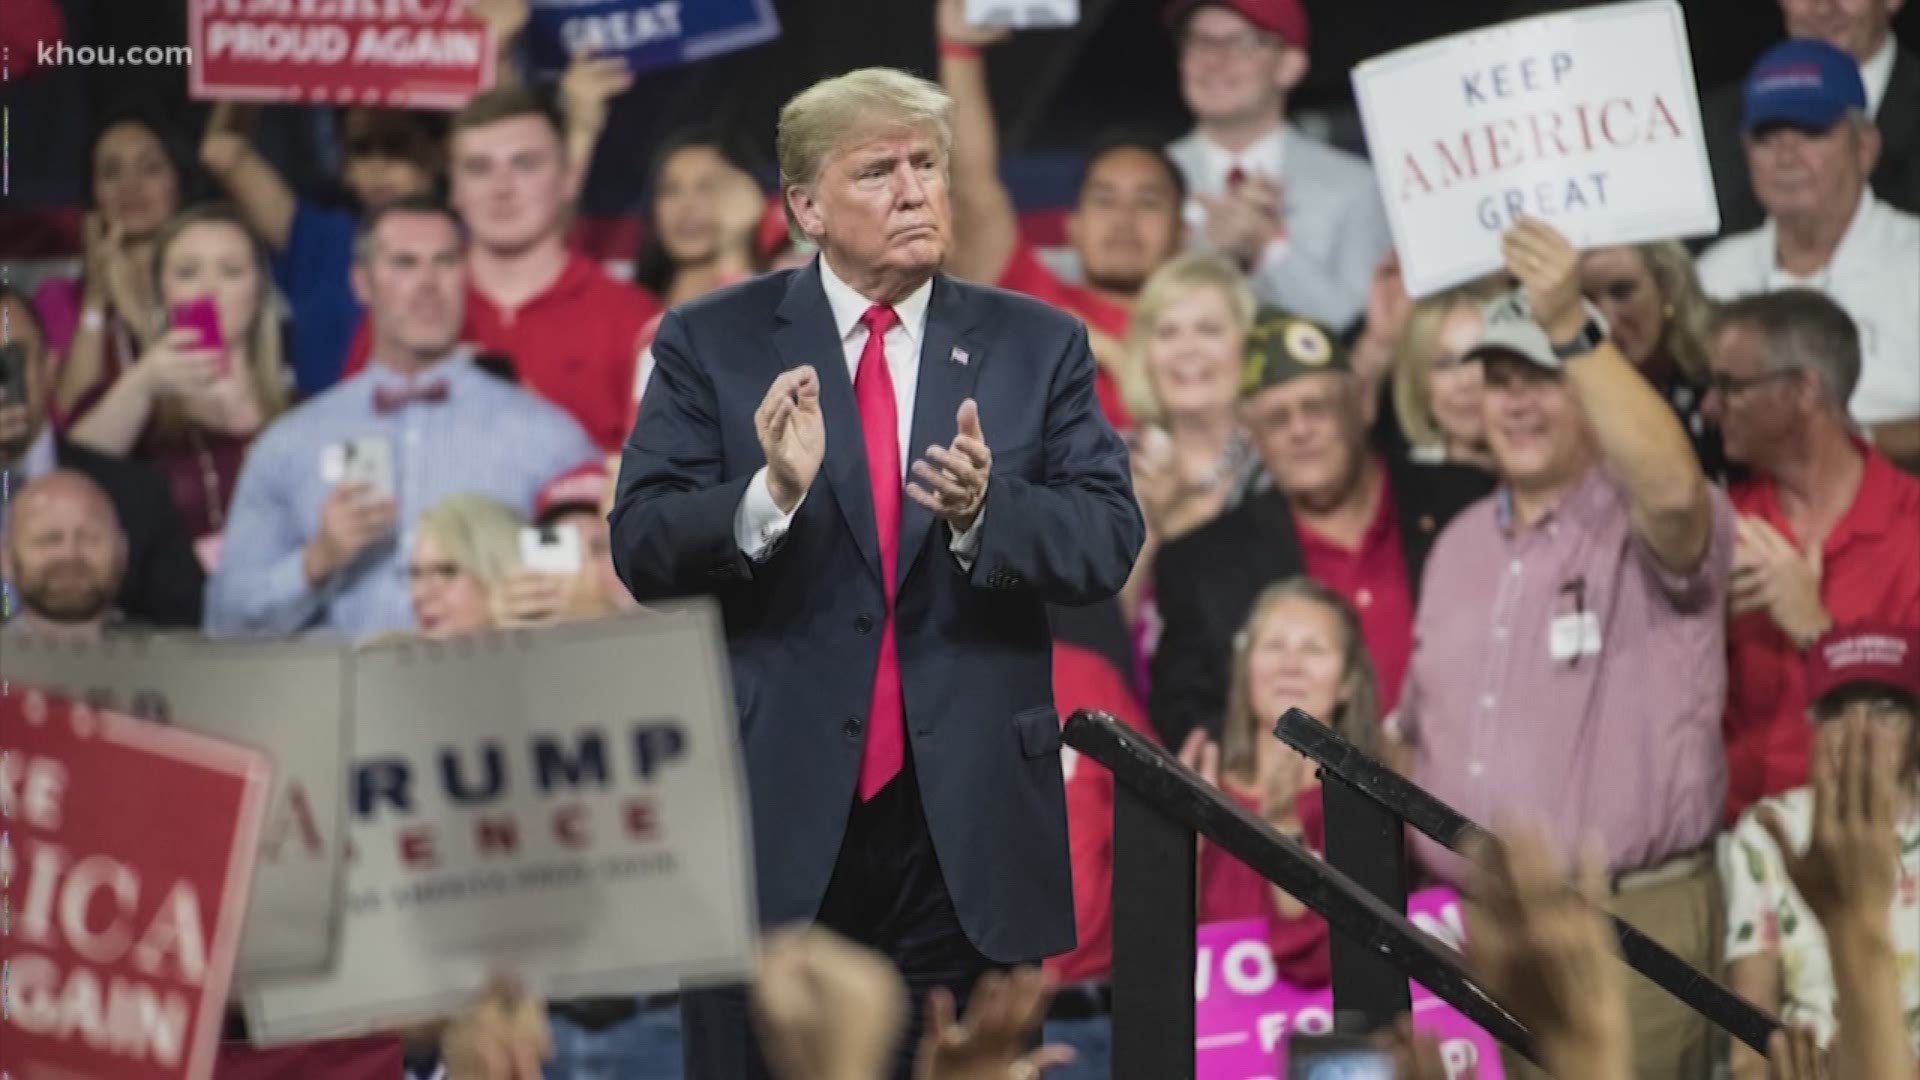 President Donald Trump's Monday rally in Houston has been moved from NRG Arena to Toyota Center.